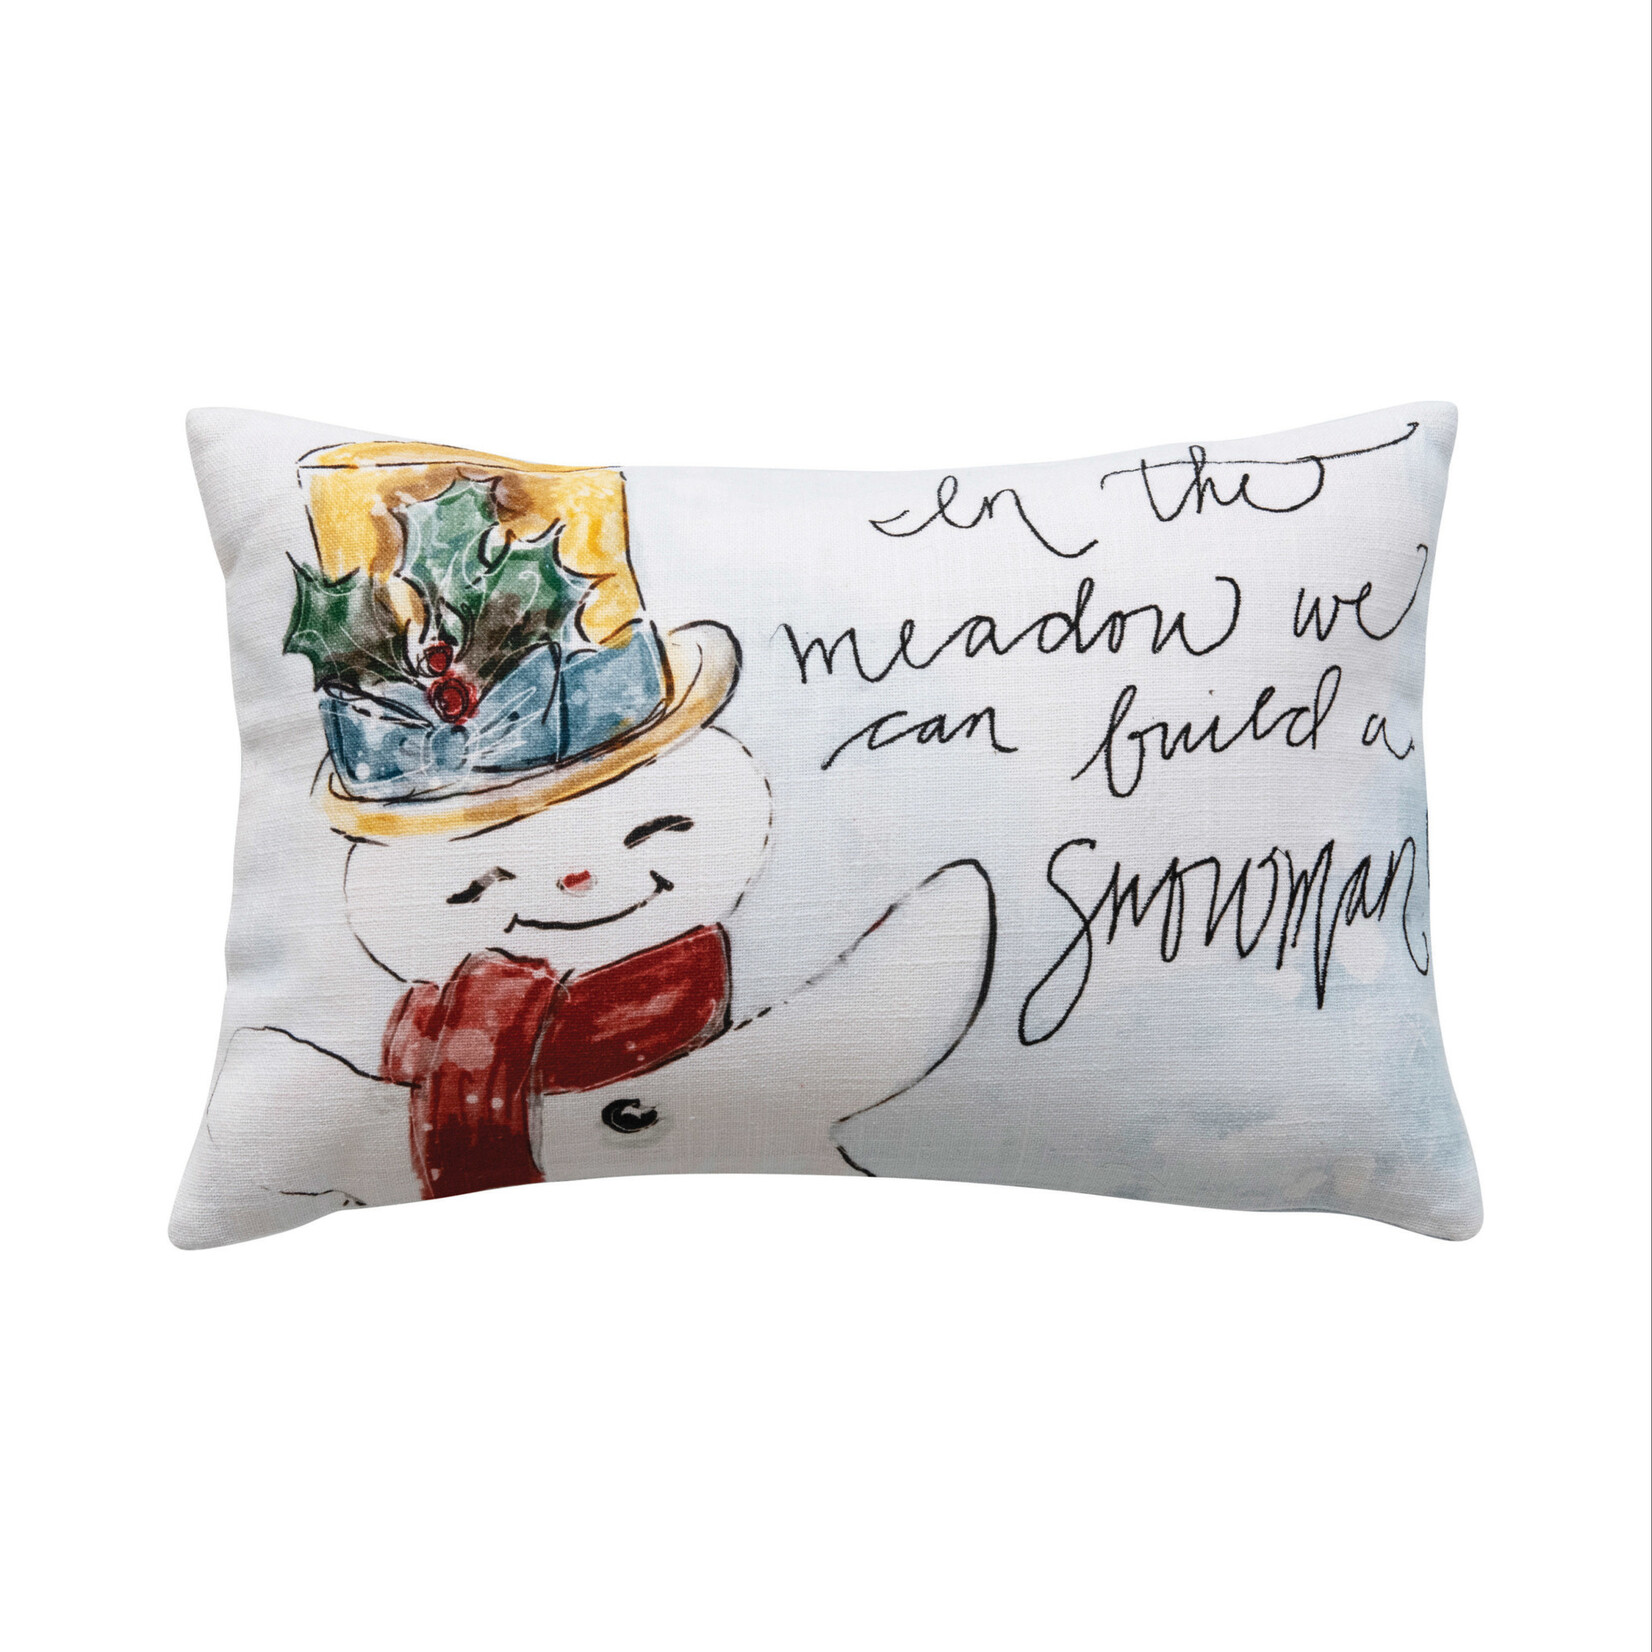 Creative Co-Op "In the Meadow We Can Build a Snowman" Pillow